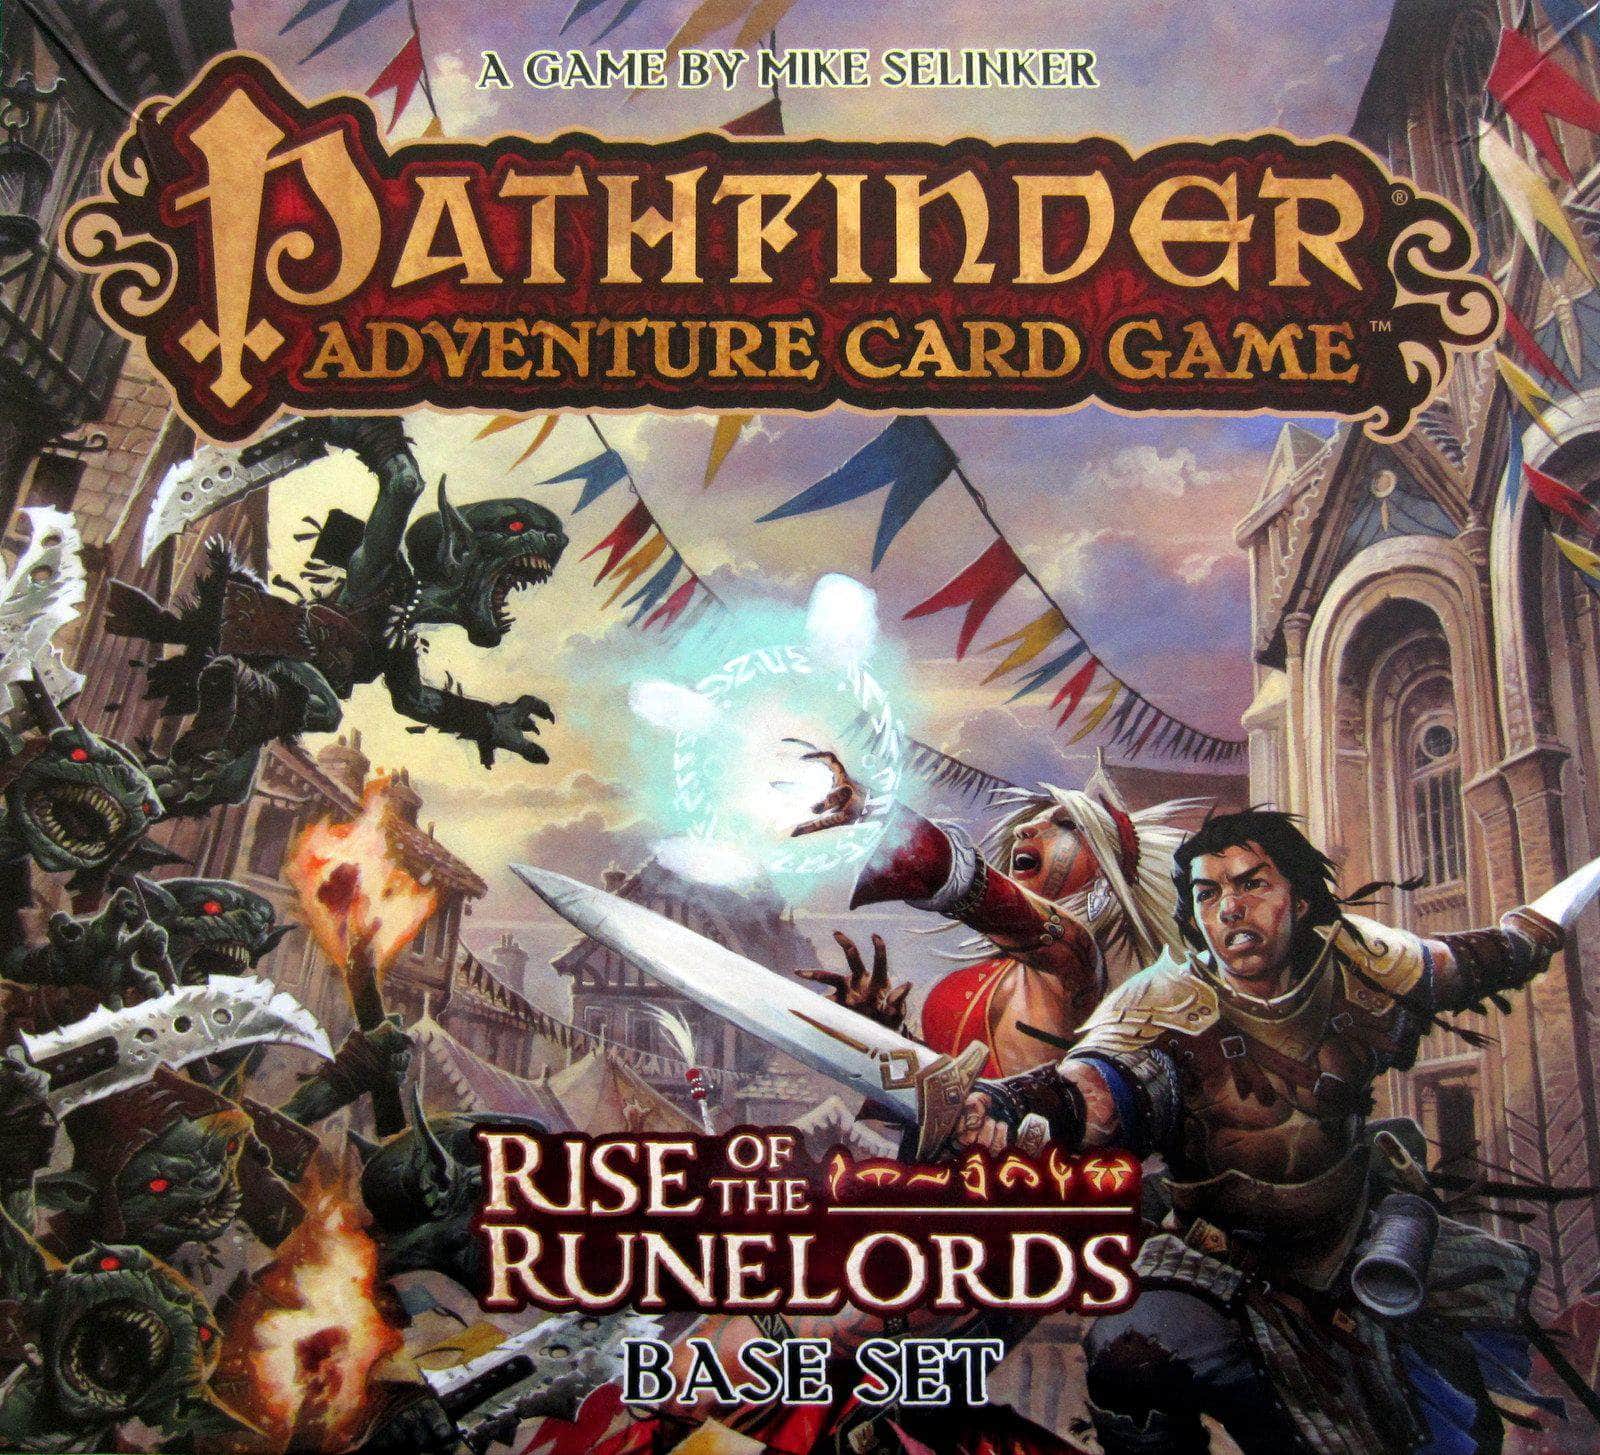 Pathfinder Adventure Card Game: Rise of the Runelords - Base Set (Retail Edition) Retail Board Game Paizo Udgivelse af KS800352A